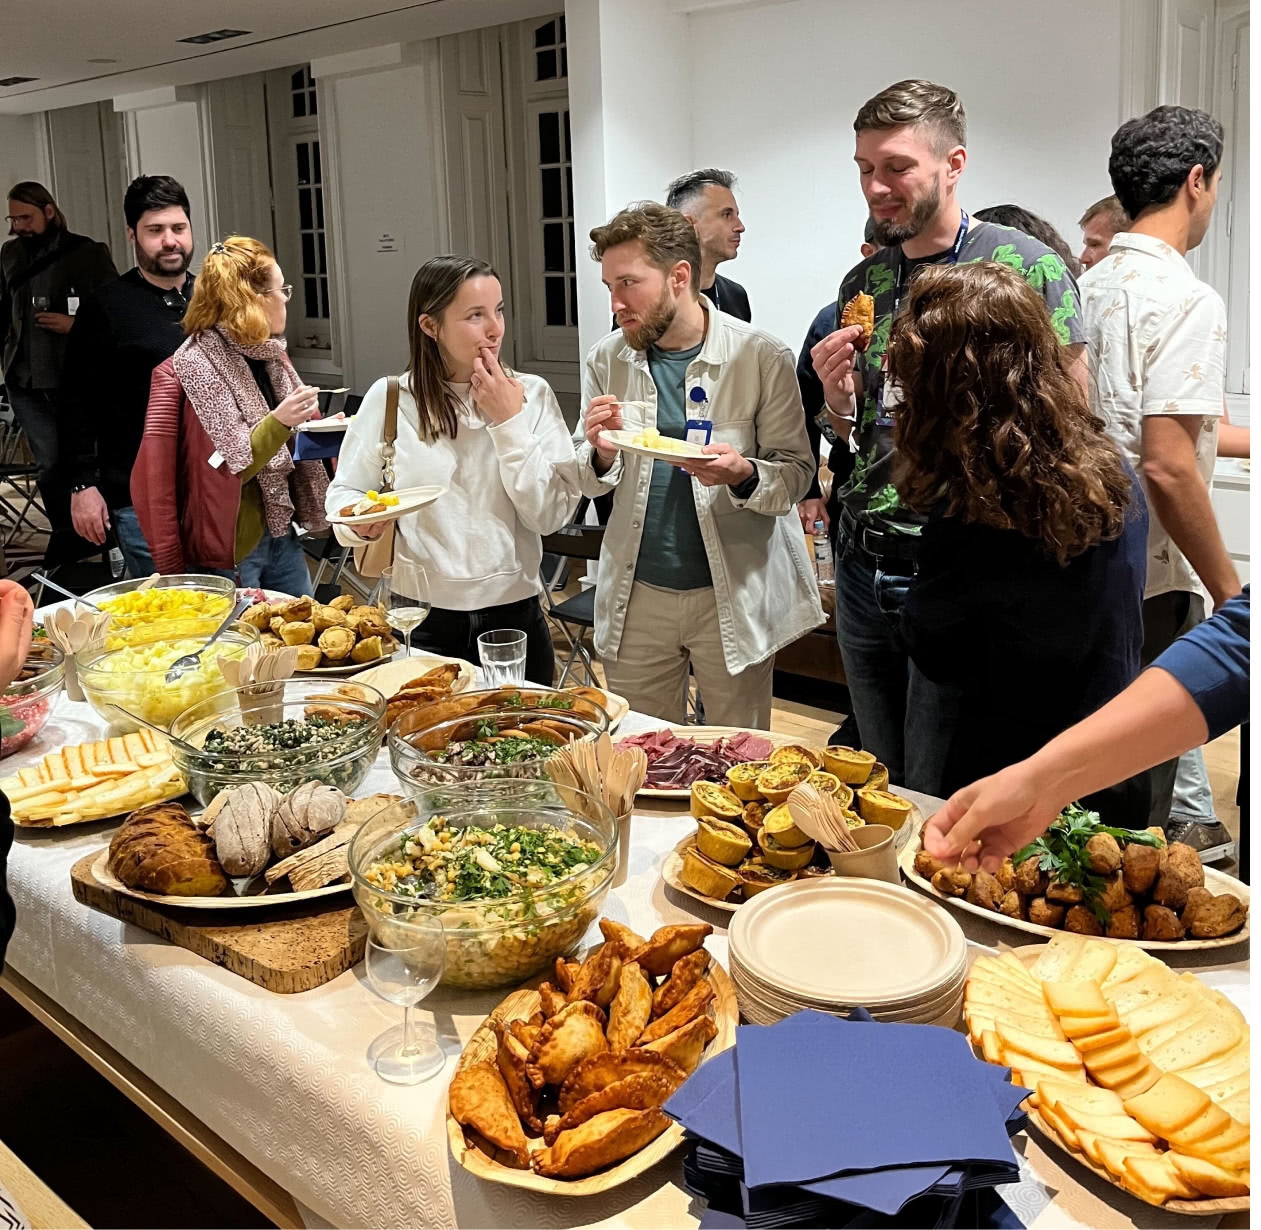 A number of people talking and eating in front of a table brimming with a delicious assortment of food.